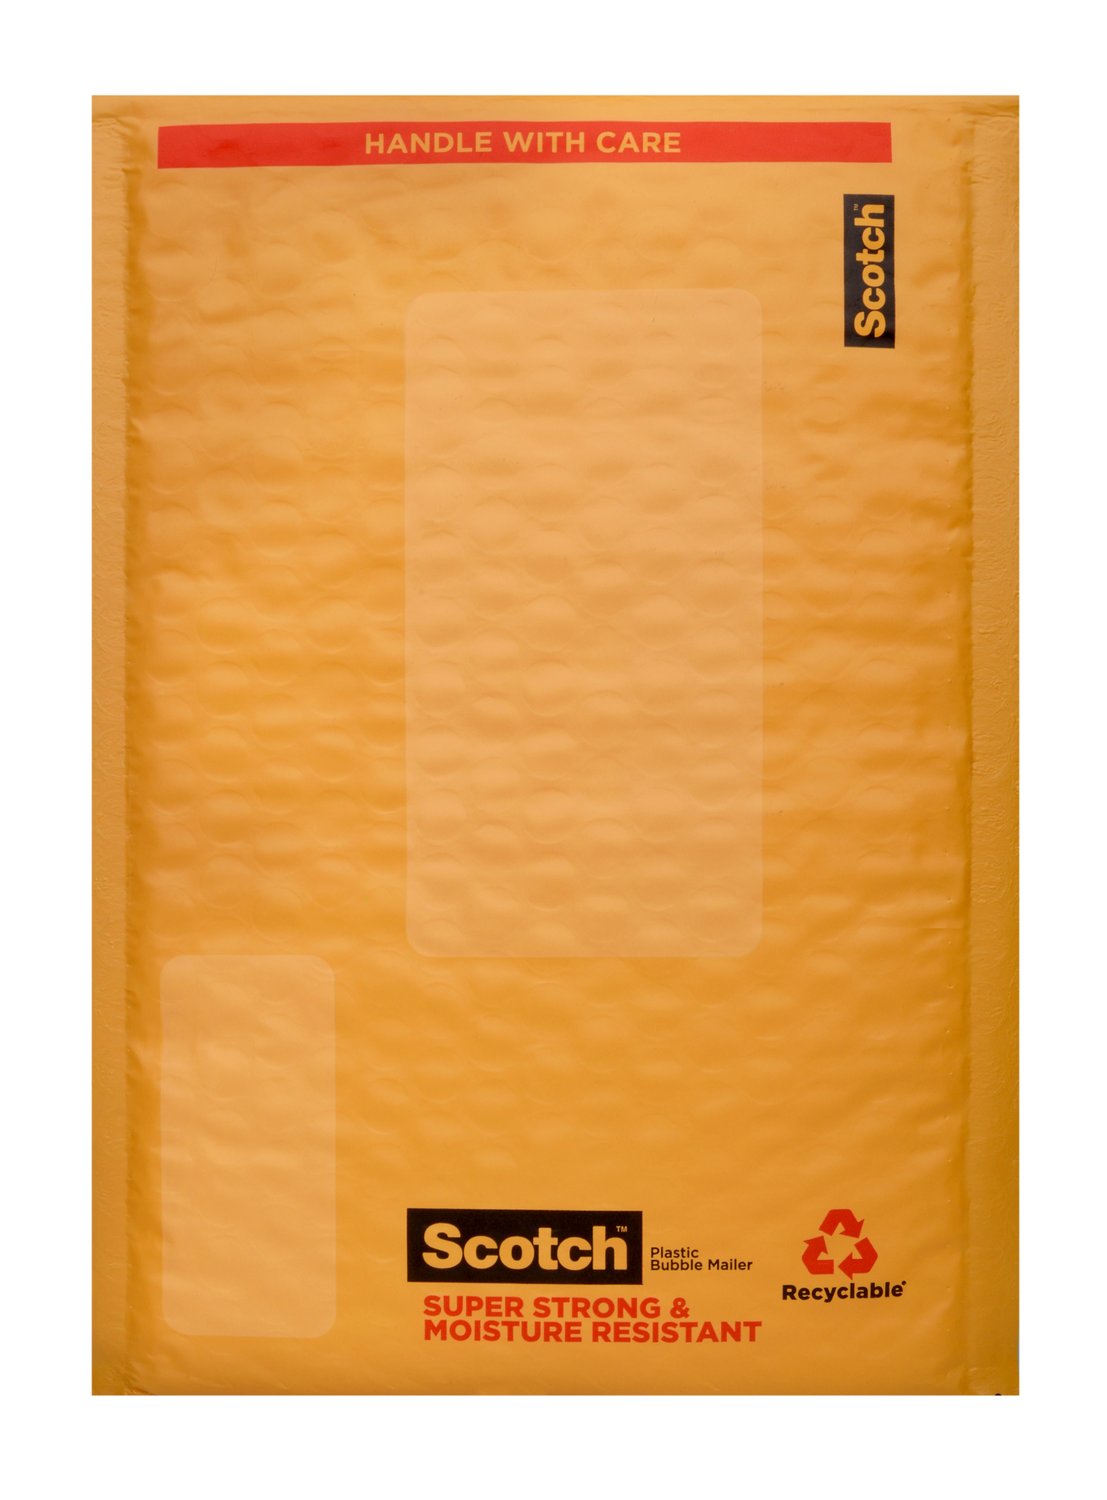 7100187752 - Scotch Smart Mailer 8913-ESF, 6 in x 9 in (152 mm x 228 mm) Size #0